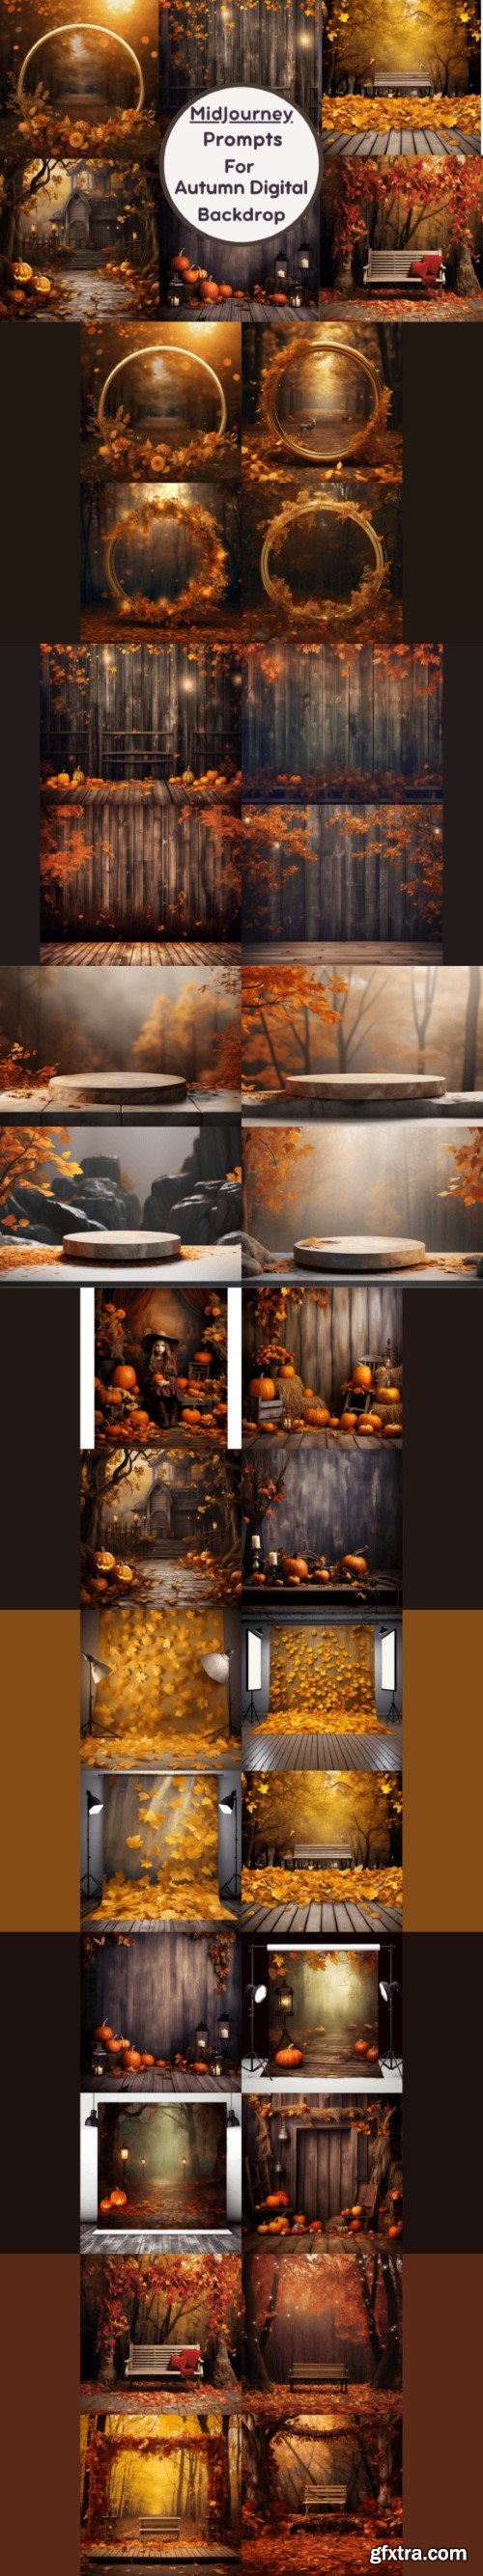 Midjourney Prompt for Autumn Backdrop